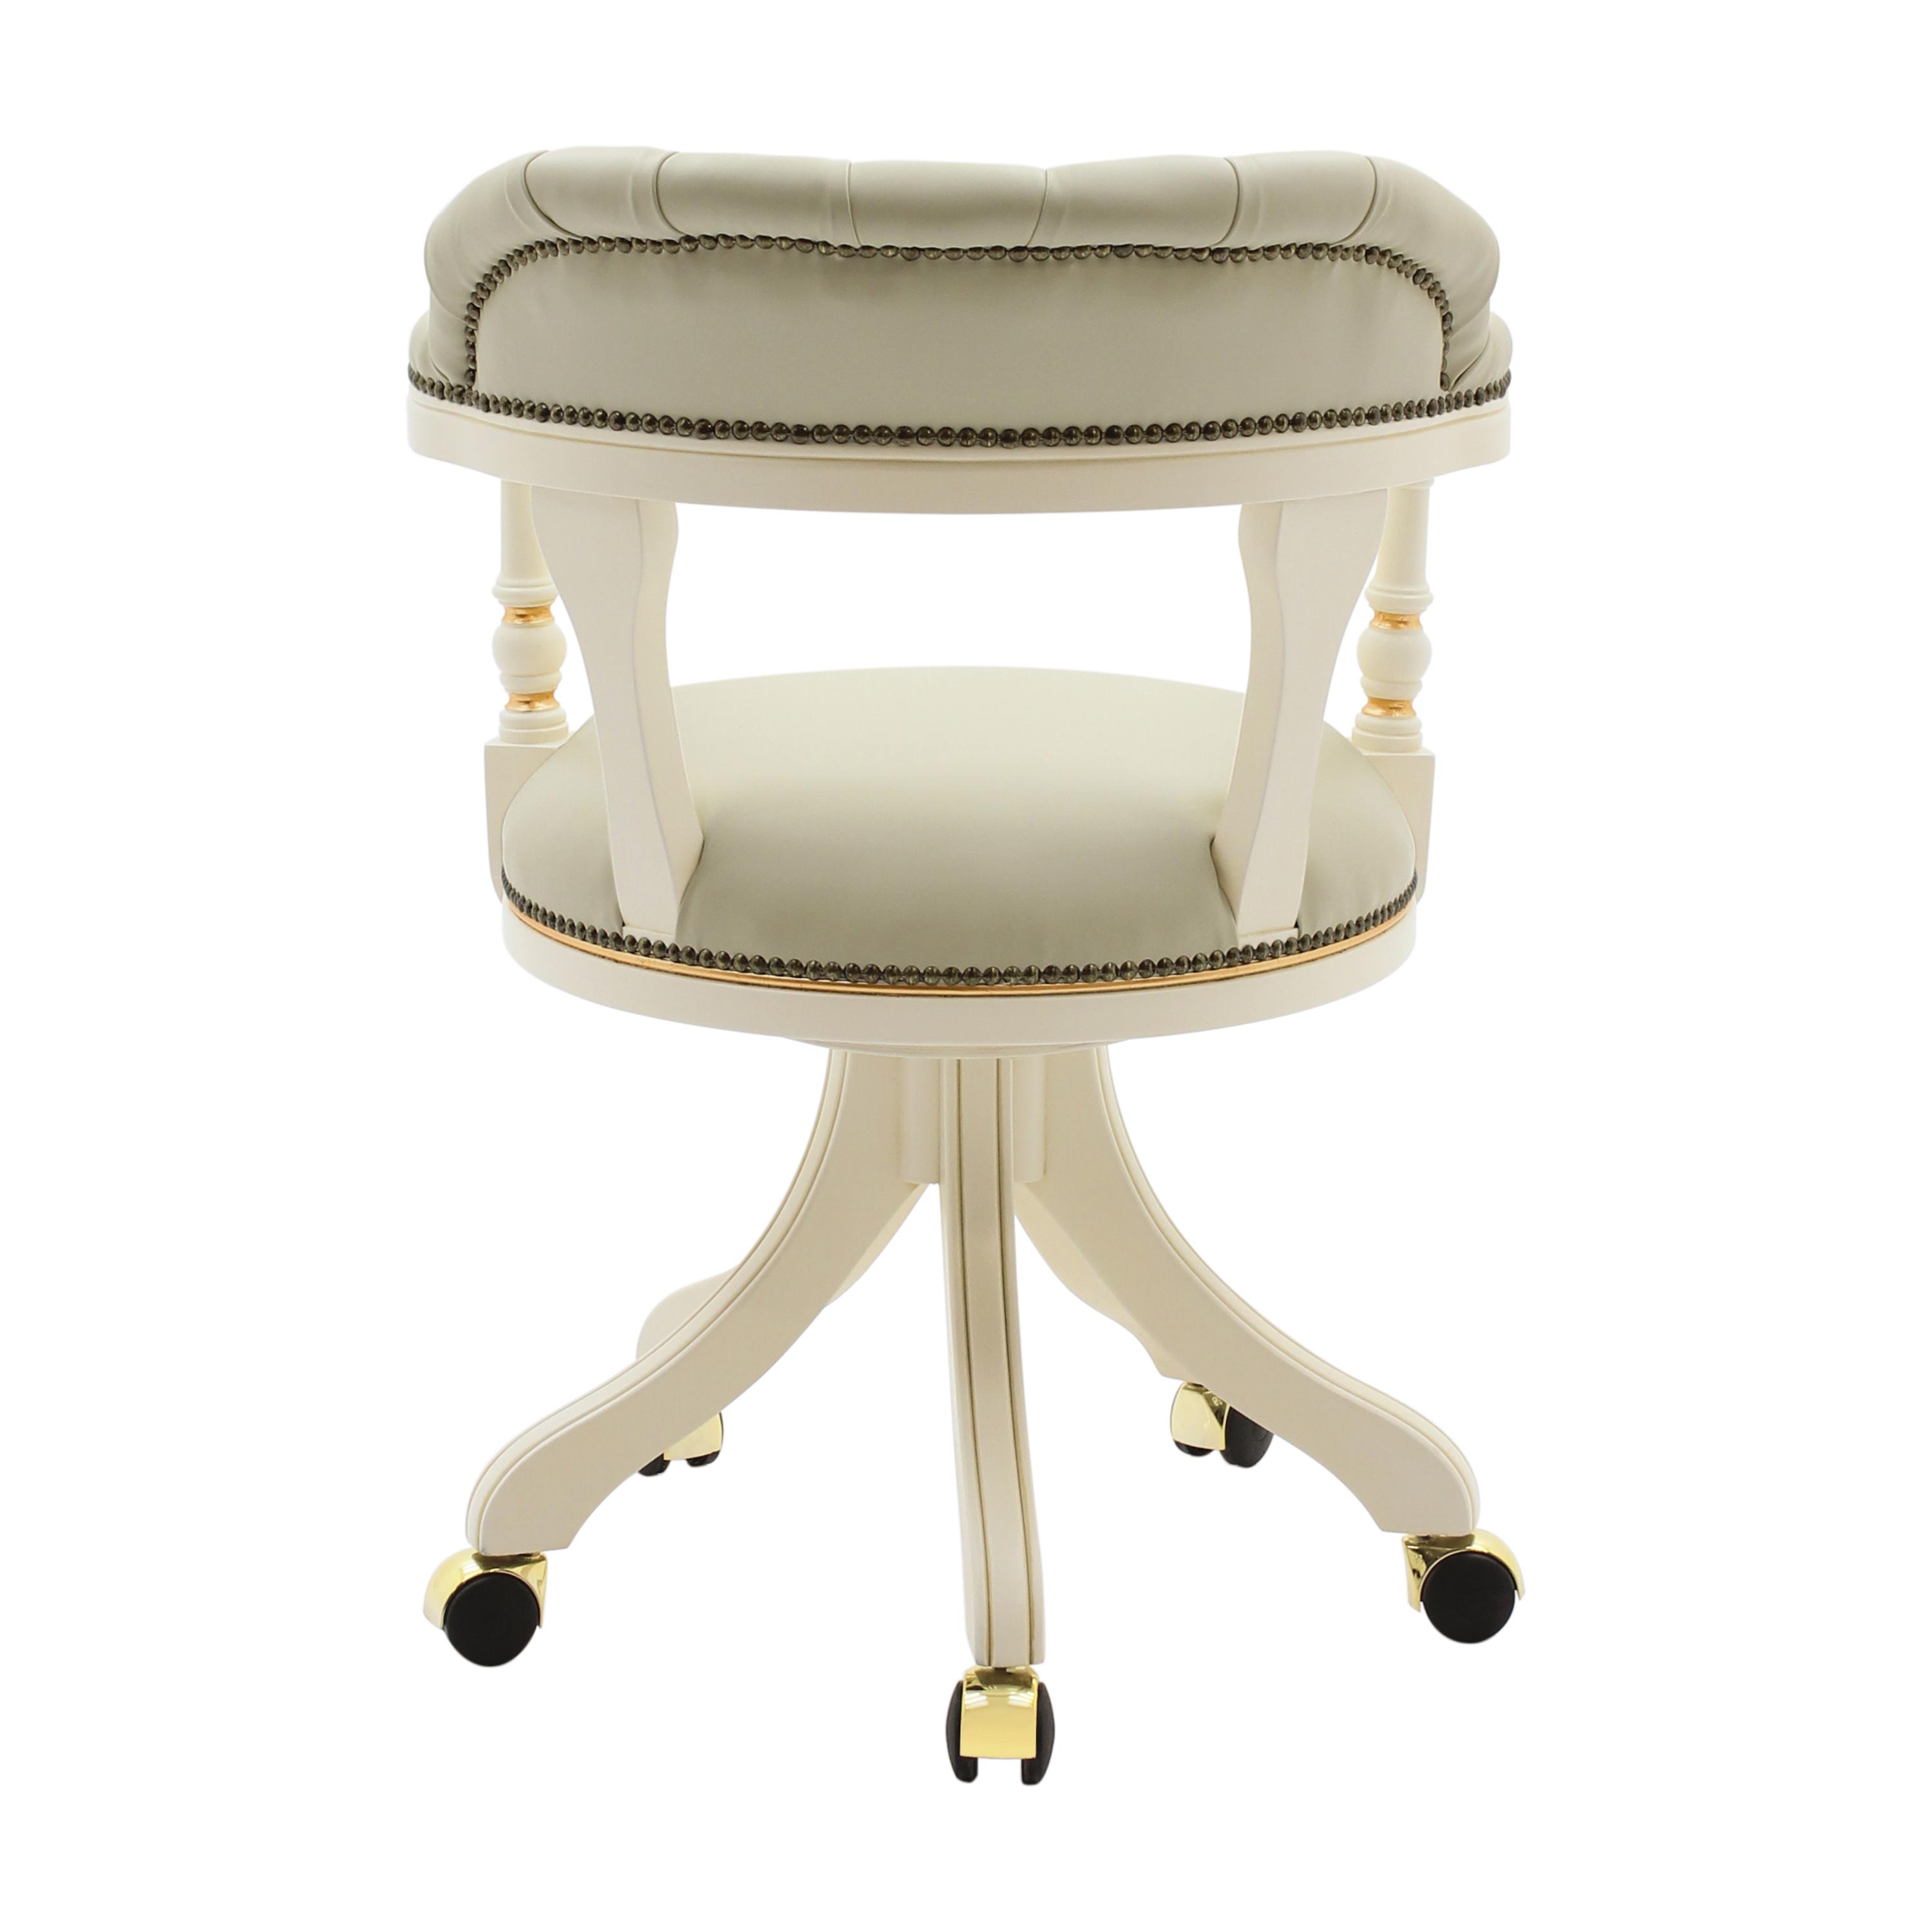 Eleonora Bespoke Upholstered Luxury Executive Curved Back Swivel Office Desk Chair MS153P Custom Made To Order